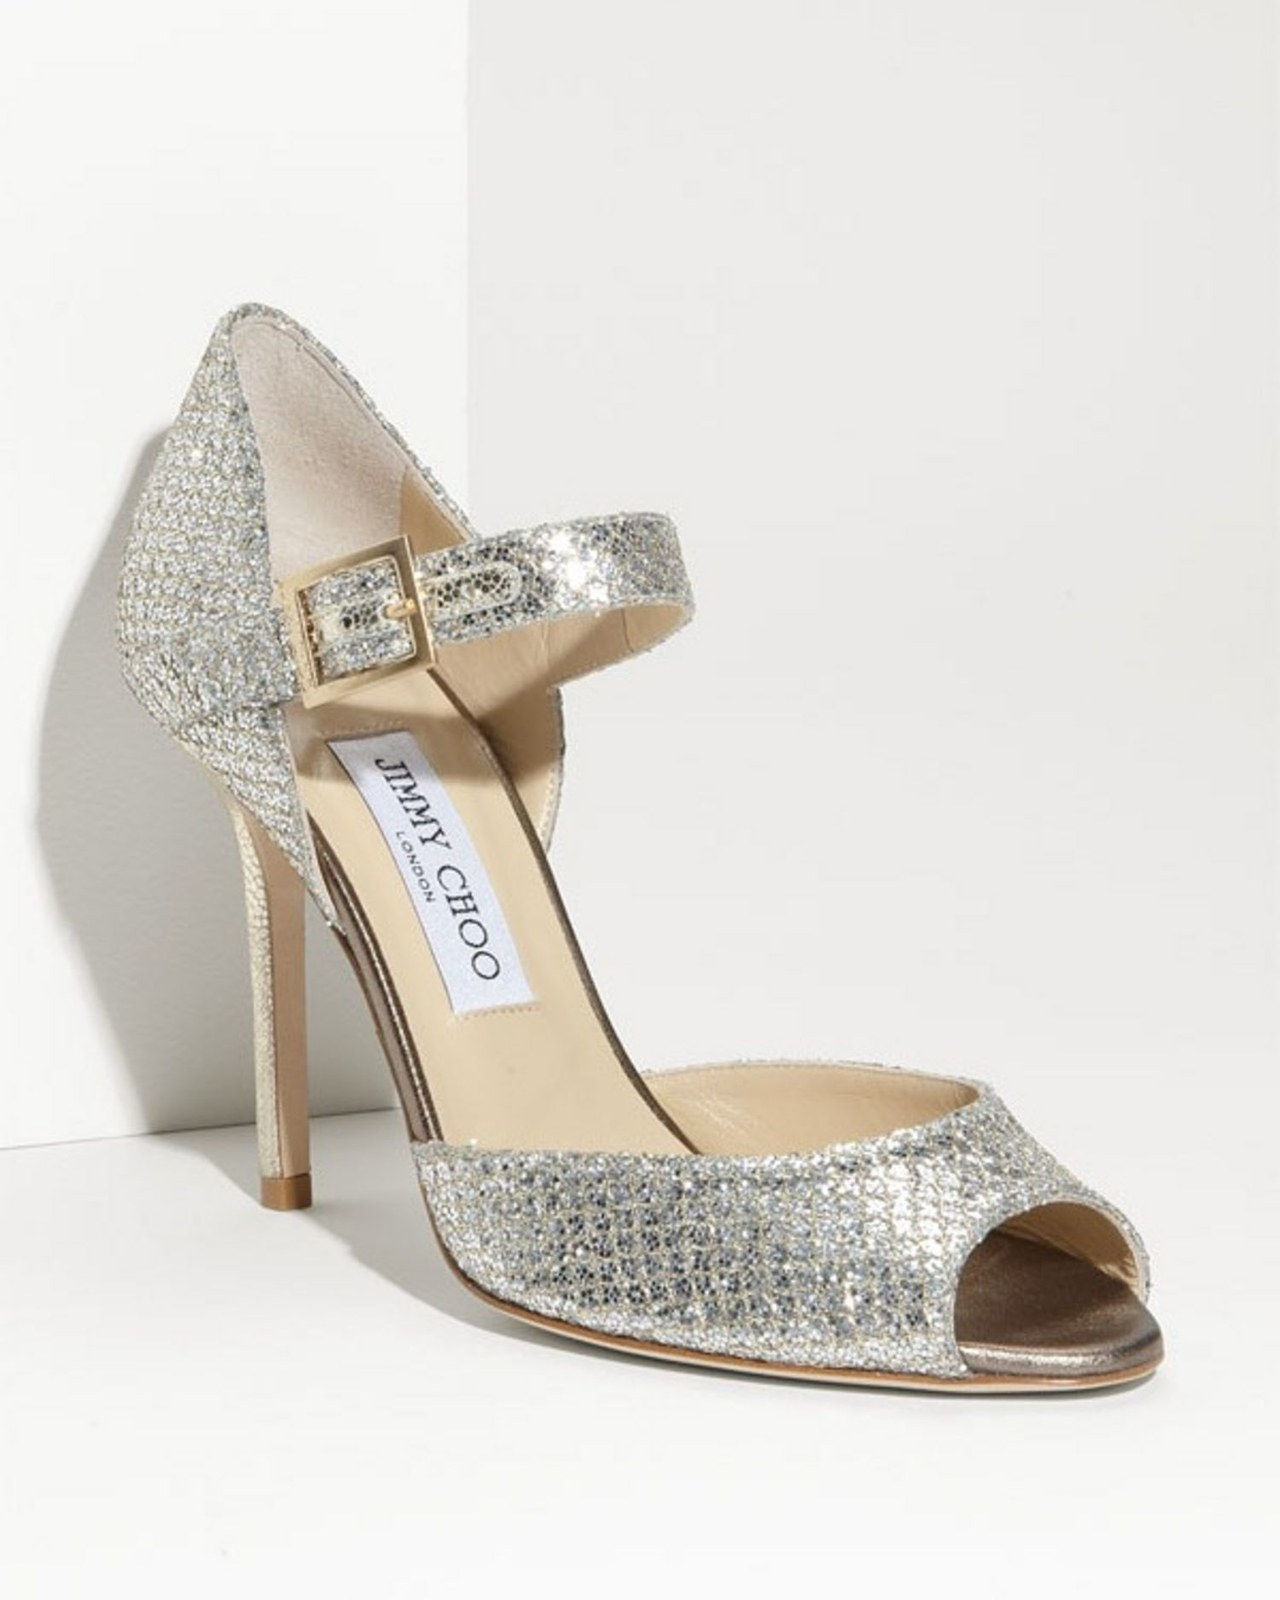 3 jimmy choo wedding shoes for brides 0304